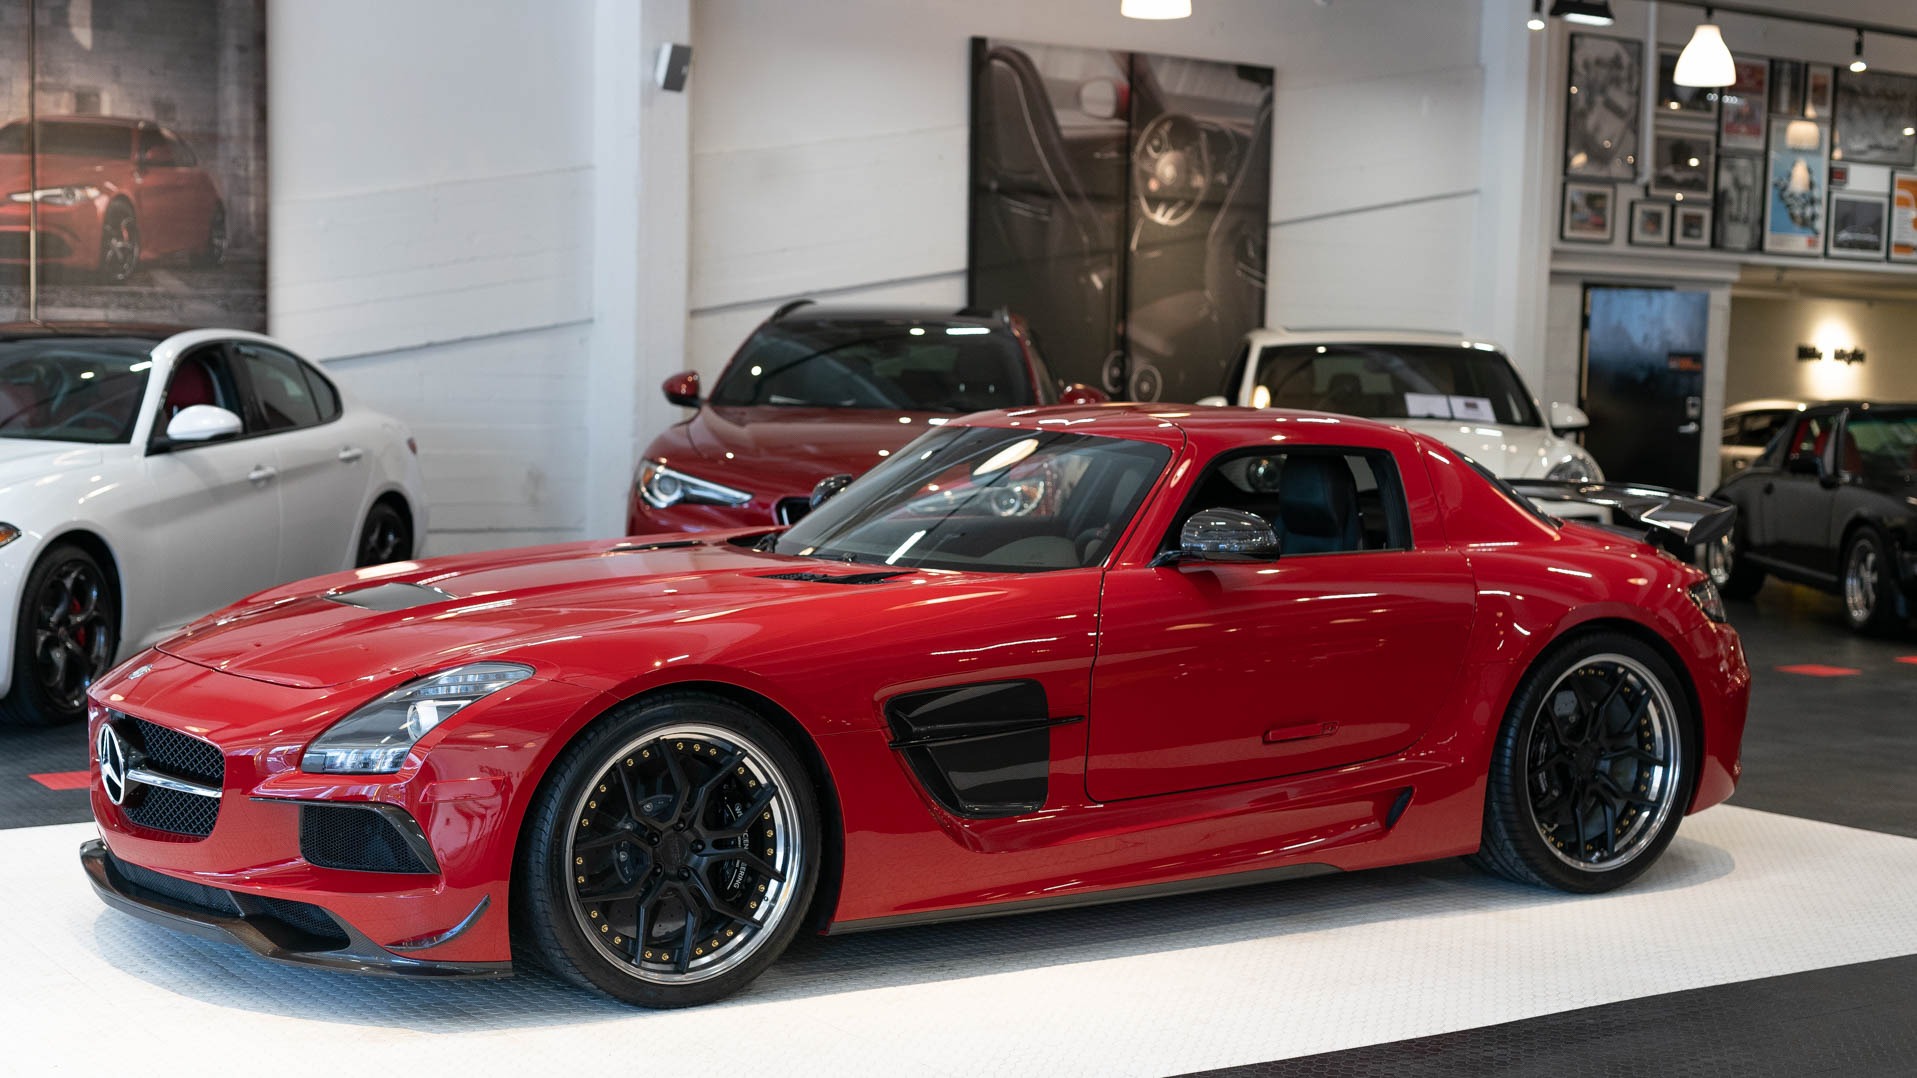 Used 14 Mercedes Benz Sls Amg Gt Black Series For Sale 399 900 Cars Dawydiak Stock